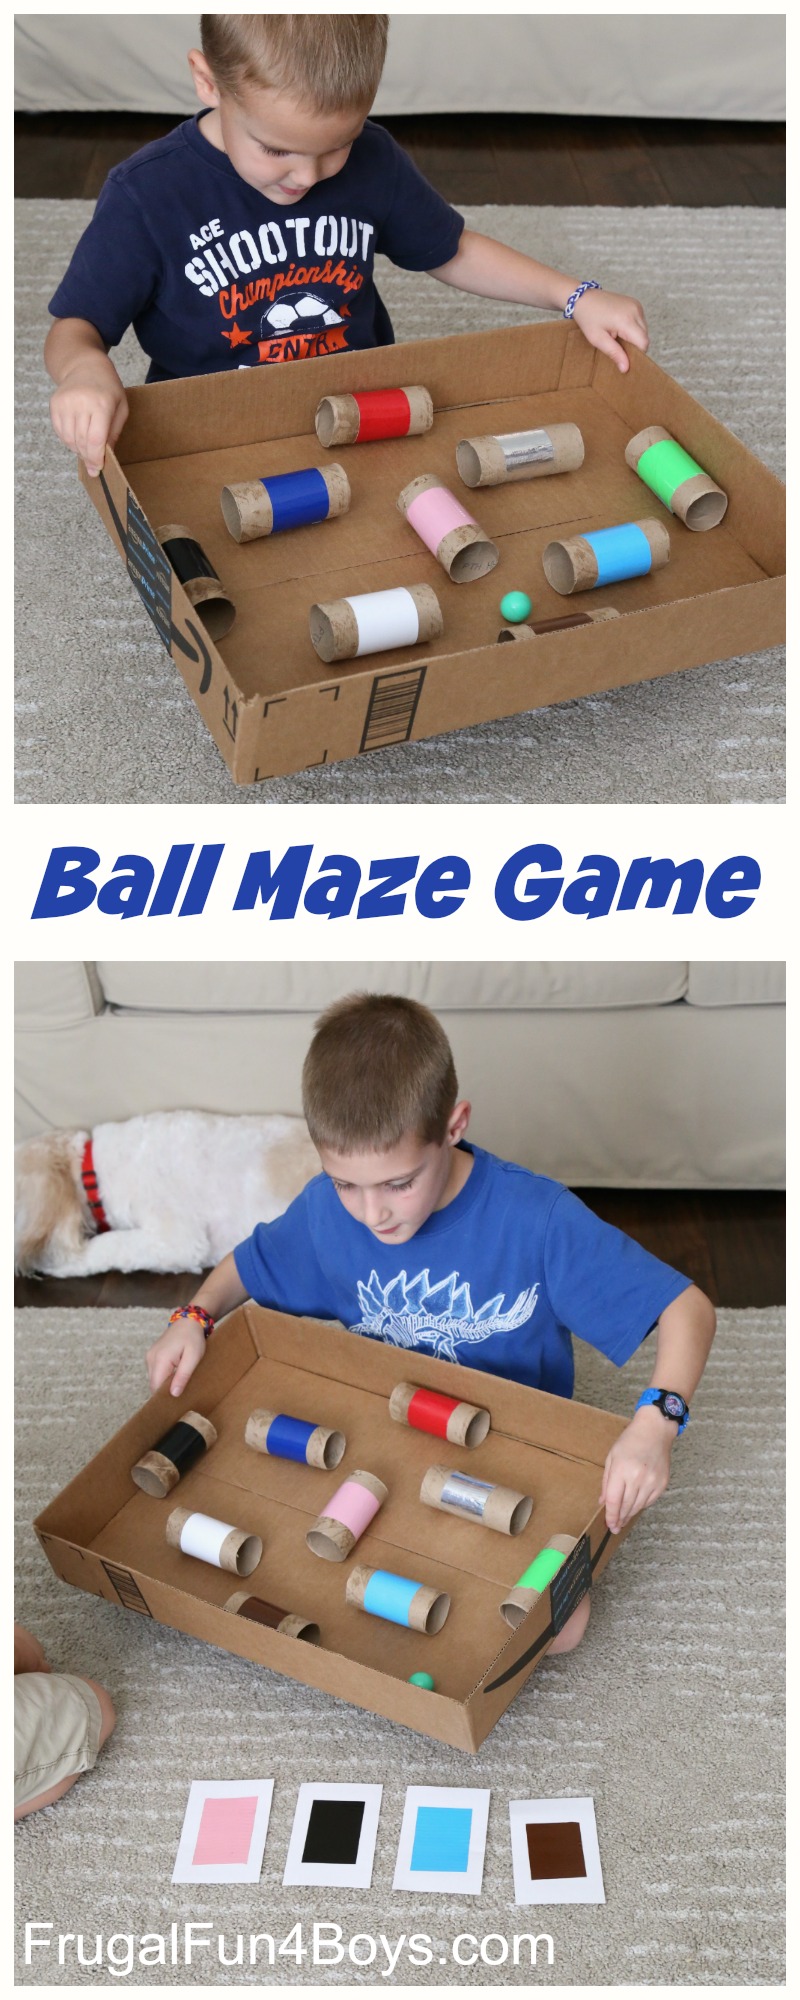 Make a Ball Maze Hand-Eye Coordination Game - Frugal Fun For Boys and Girls